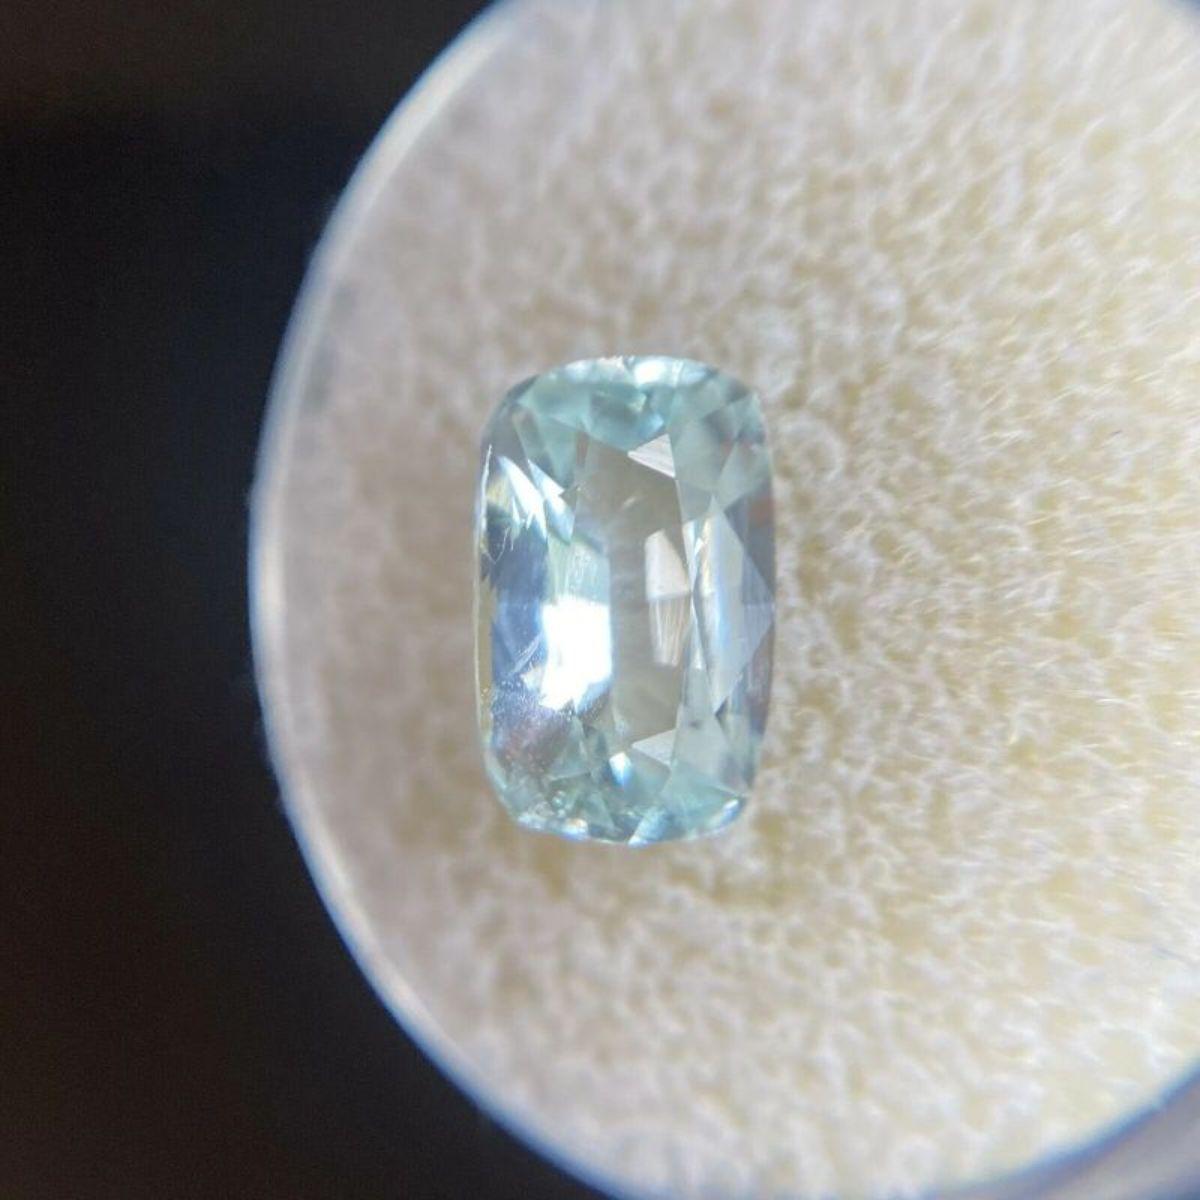 Natural Blue Aquamarine 2.20ct Antique Cushion Cut Loose Gemstone 10.2 x 6.4mm

Natural Blue Aquamarine Gemstone. 
2.20 Carat with a beautiful blue colour and good clarity. A clean gem with only some small natural inclusions visible when looking